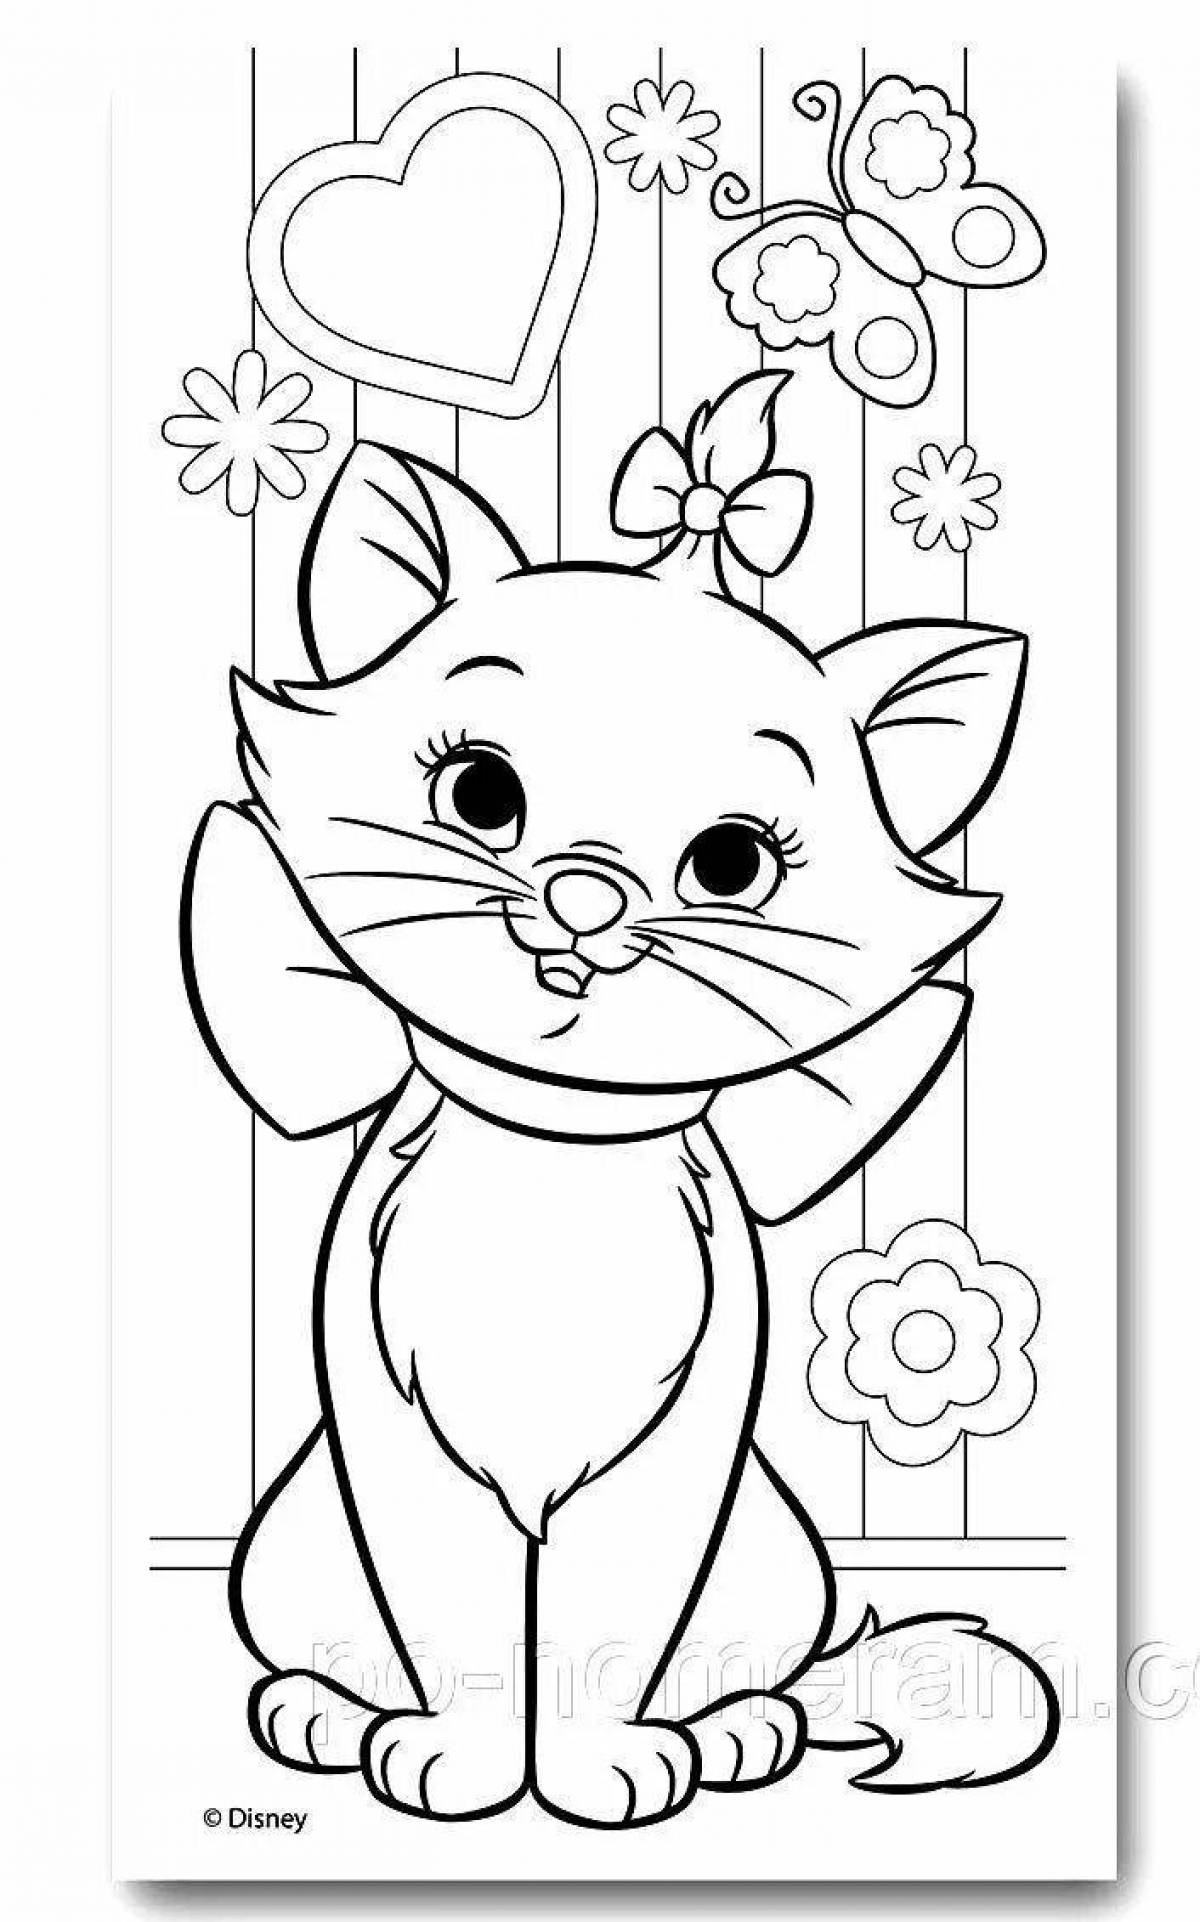 Coloring page graceful kitten with a bow